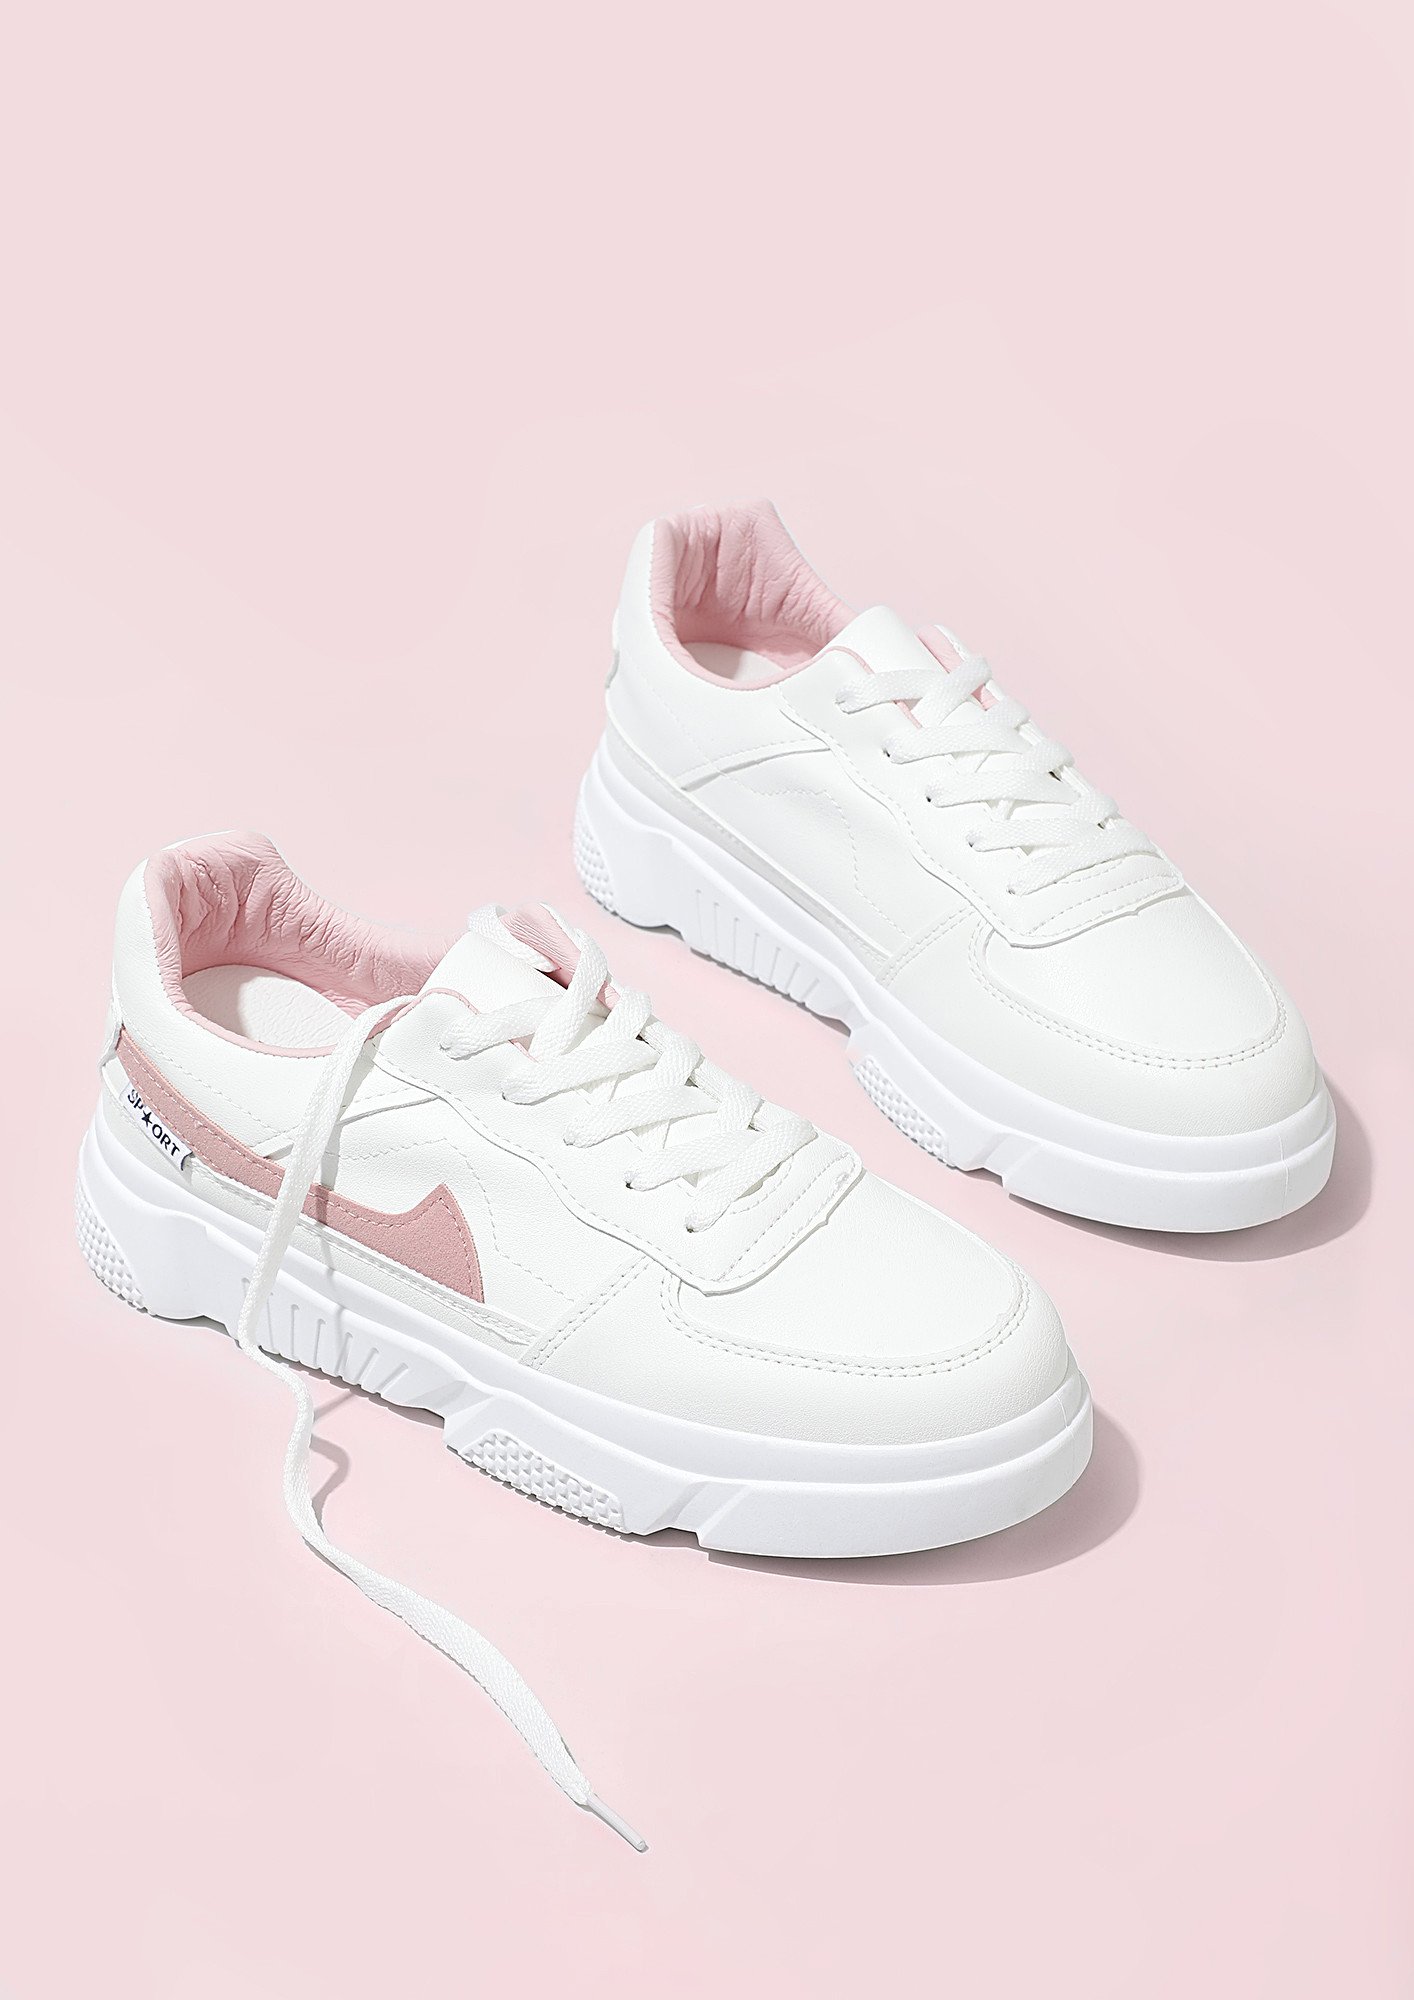 FEET ON A CLOUD WHITE PINK TRAINERS